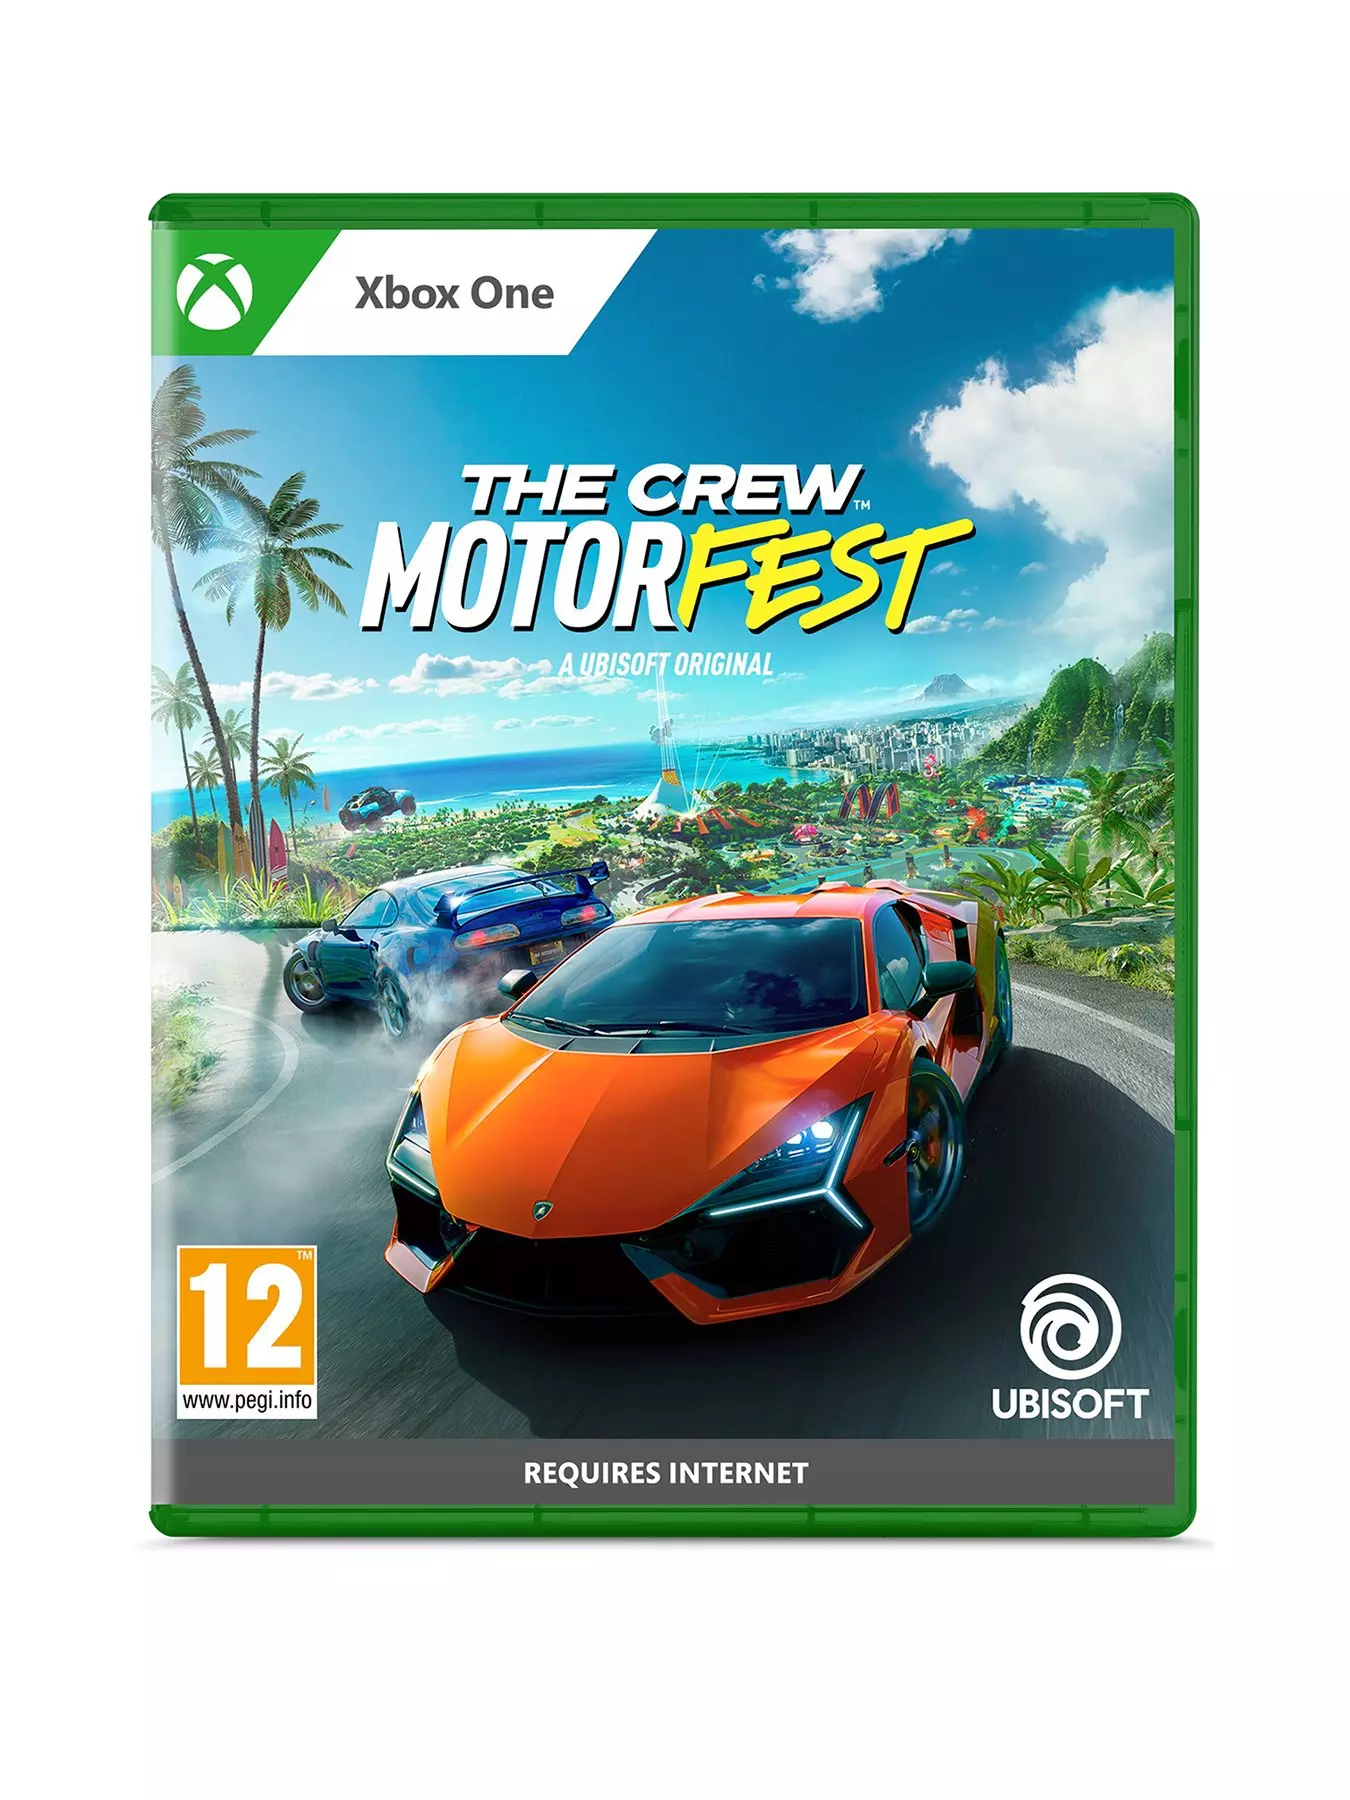 ✓ How to Download FORZA HORIZON 4 in PC for FREE 🔥 